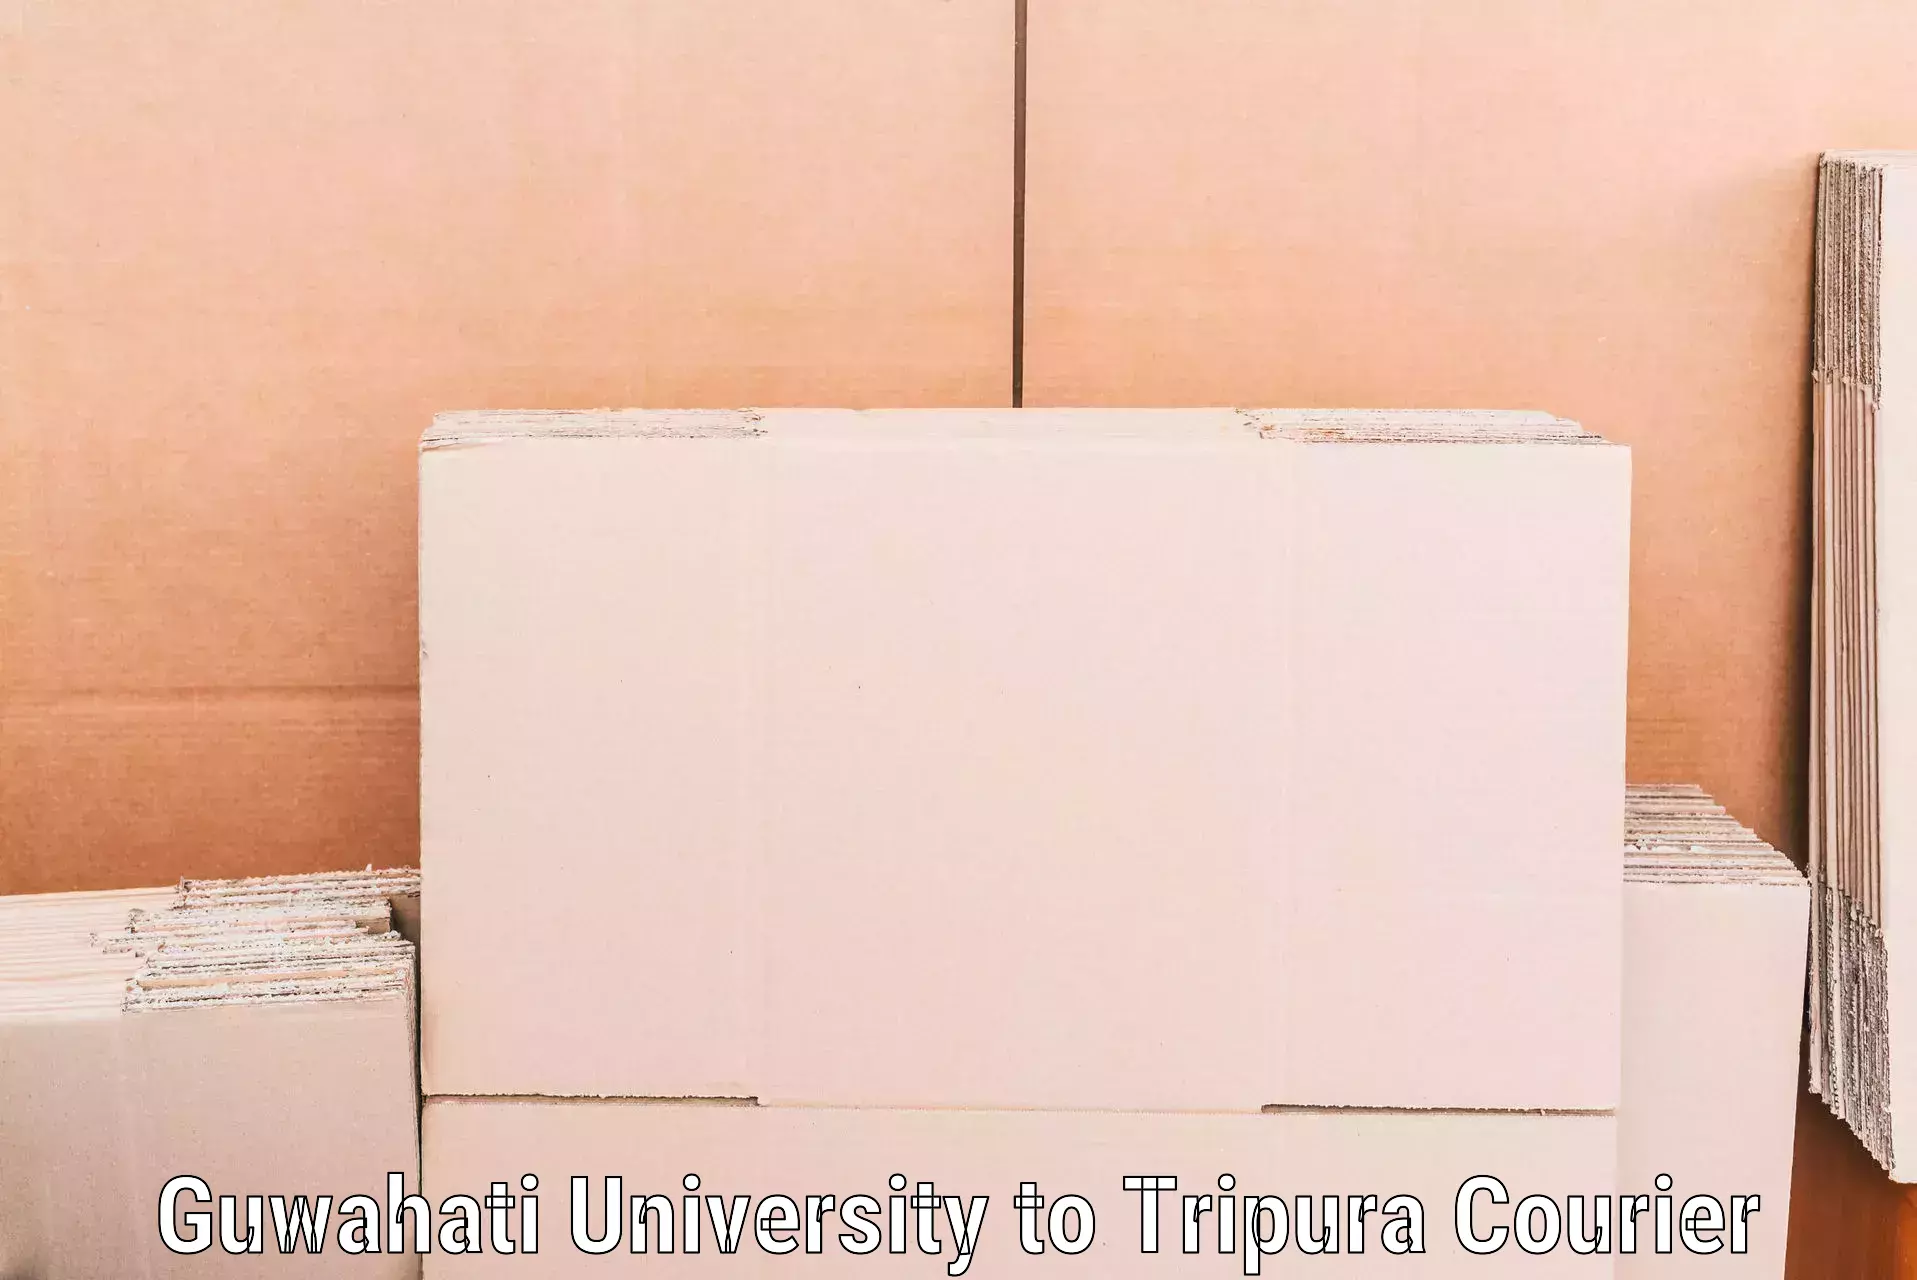 High-quality moving services Guwahati University to Amarpur